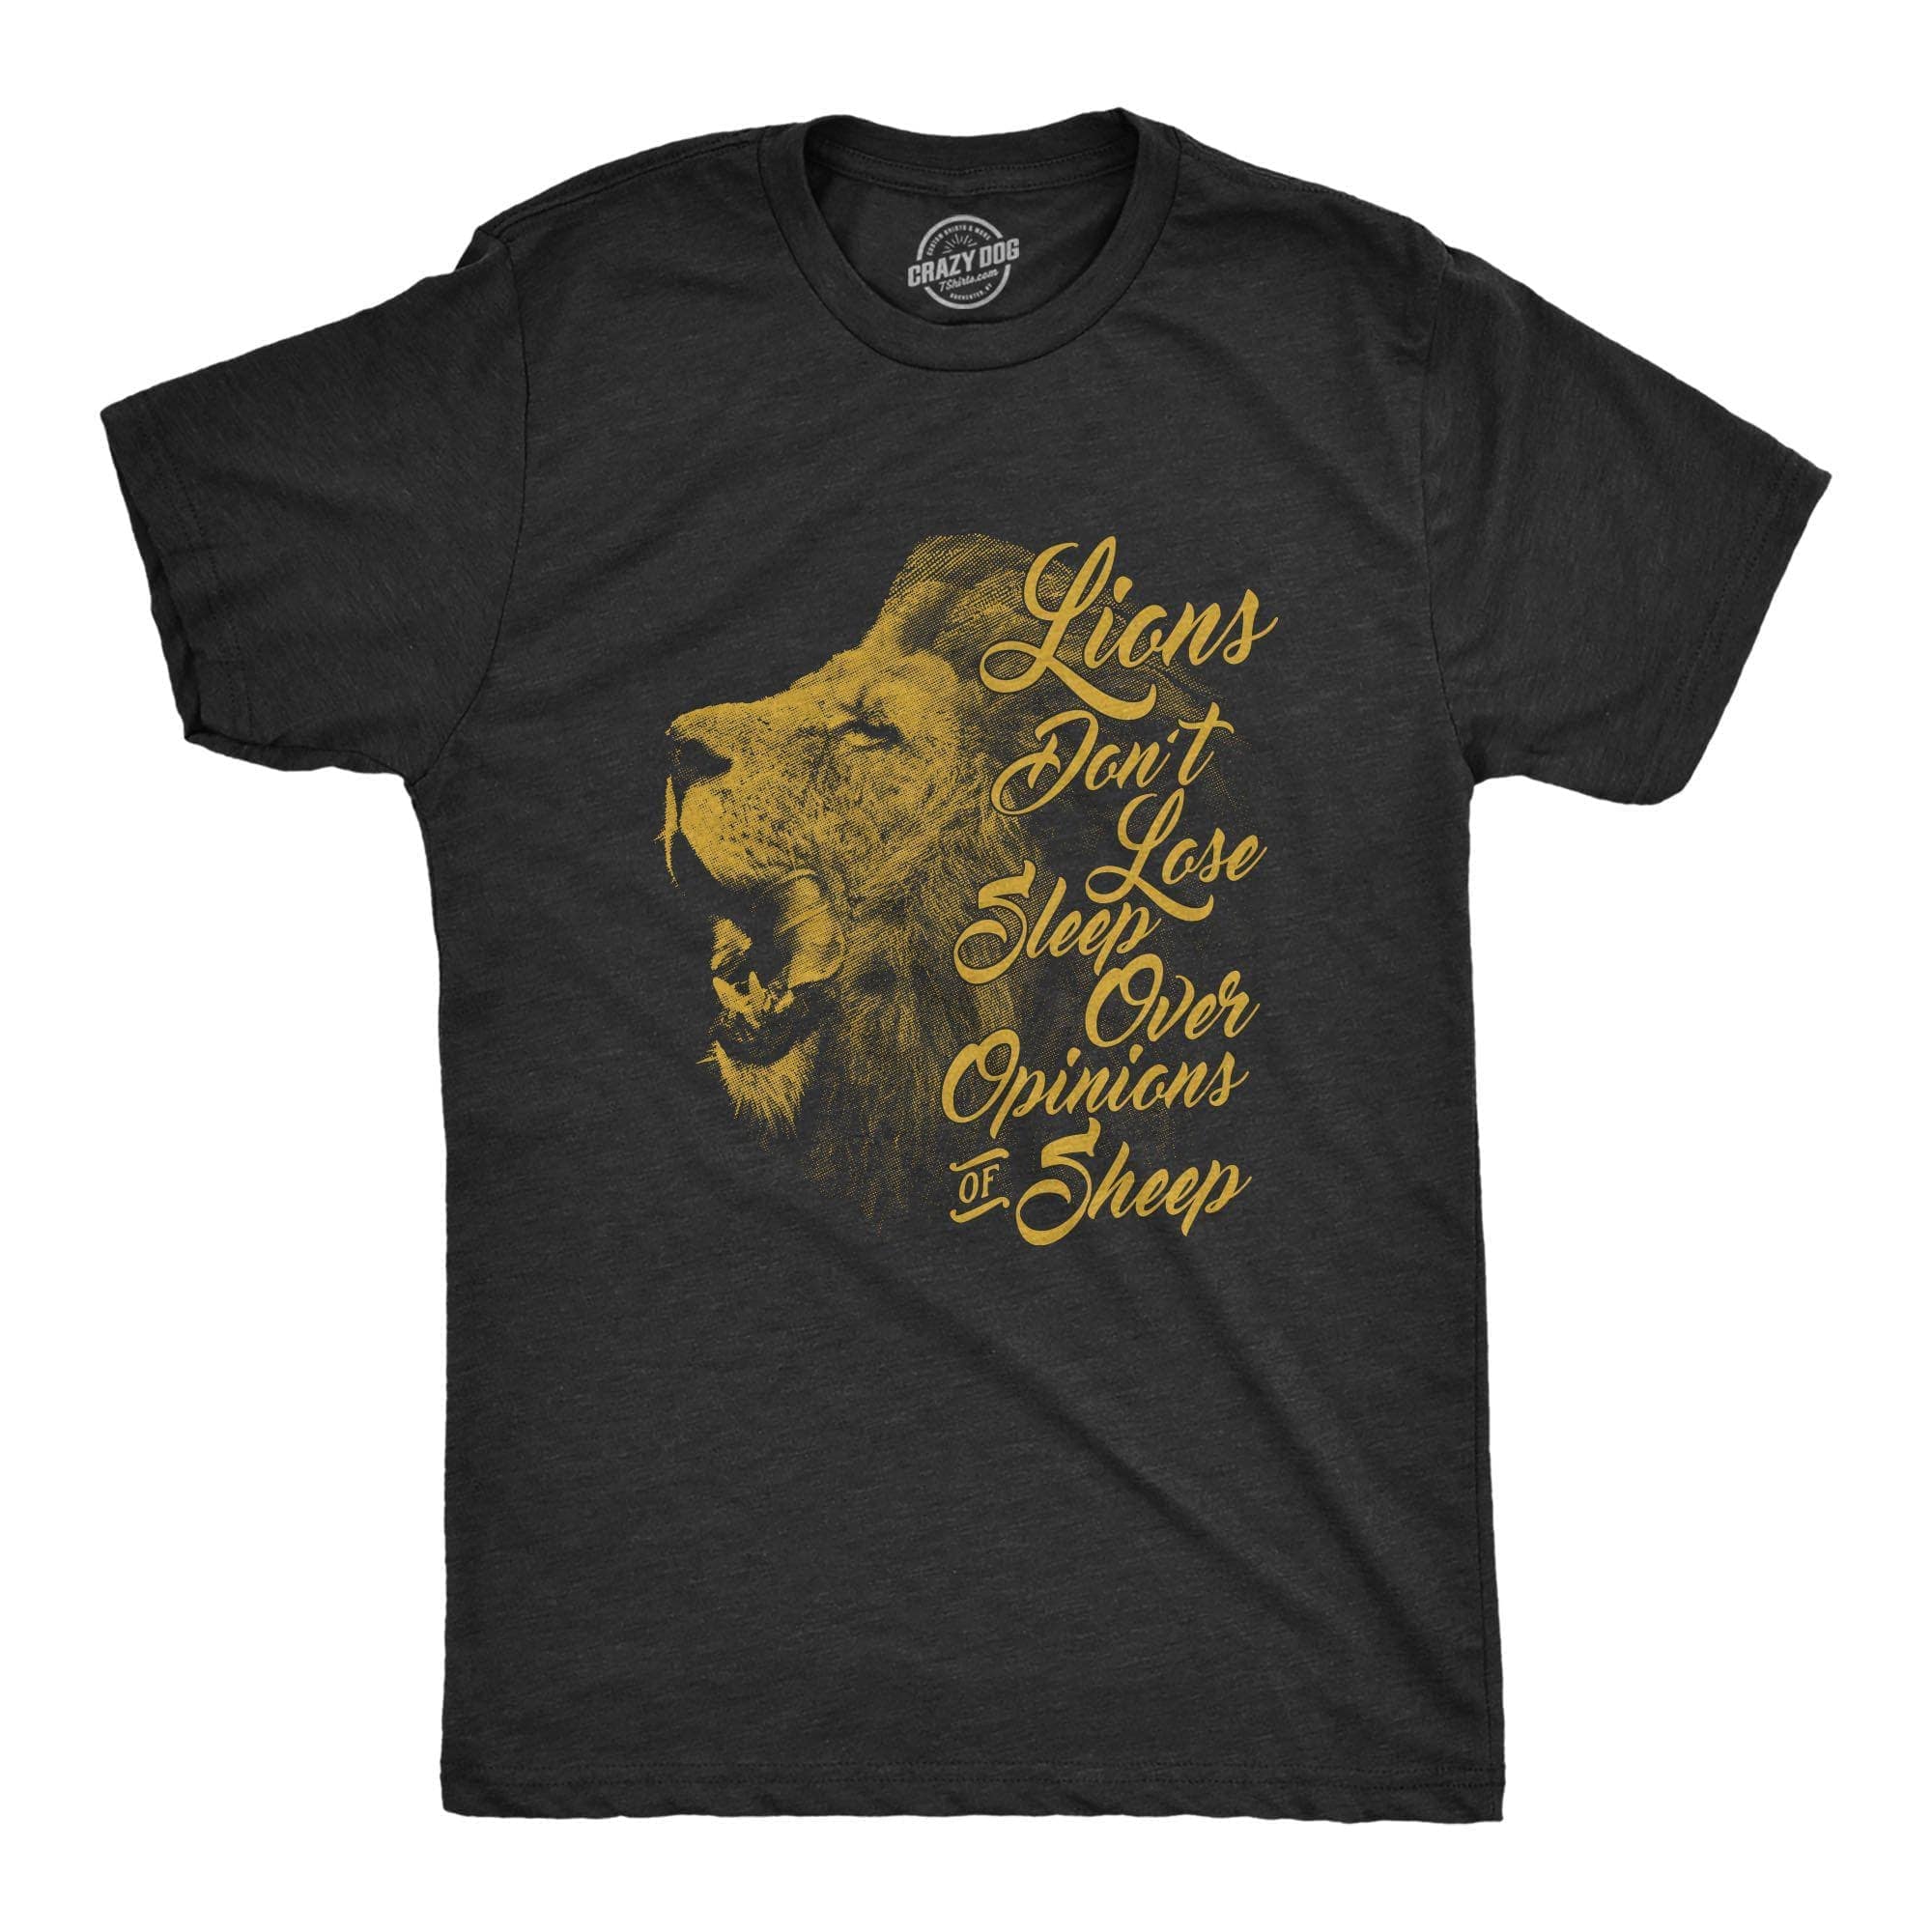 Lions Dont Lose Sleep Over The Opinions Of Sheep Men's Tshirt  -  Crazy Dog T-Shirts